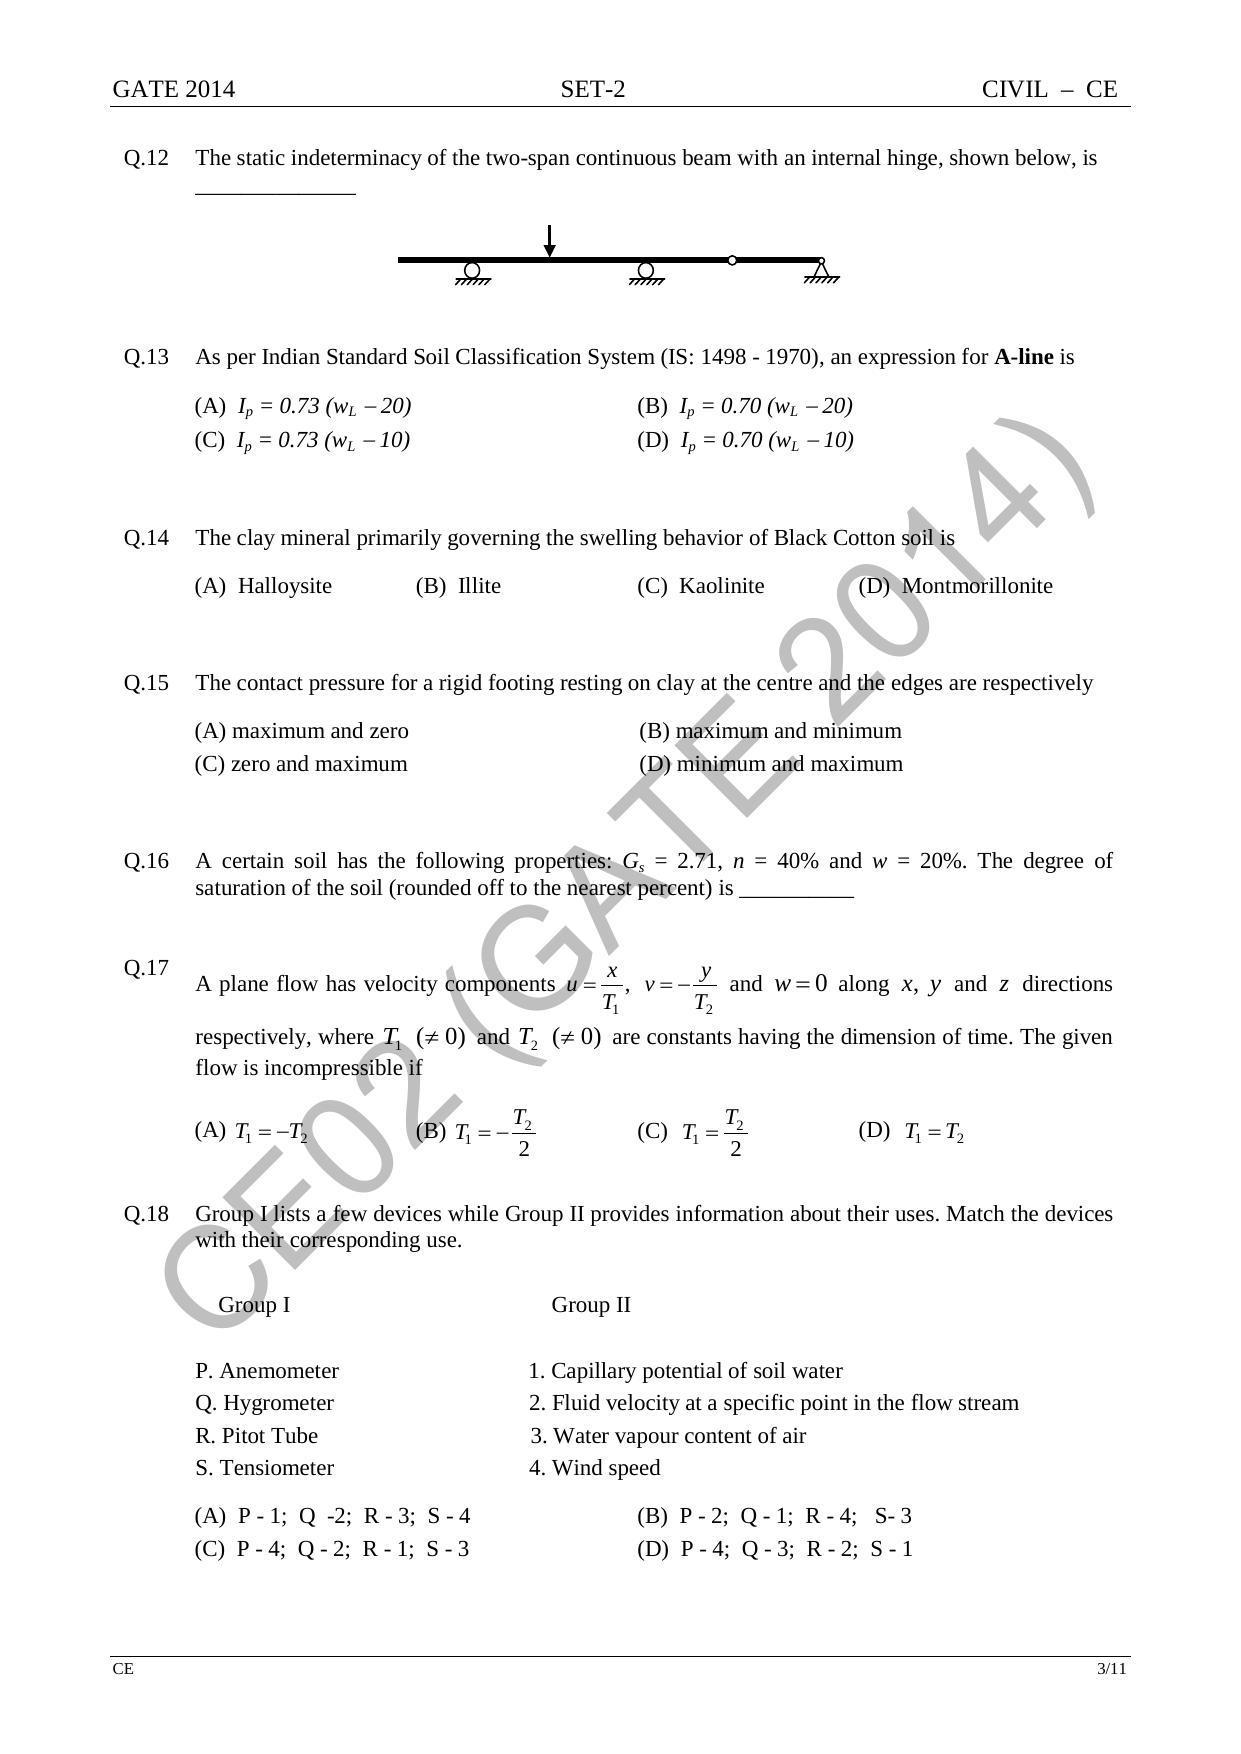 GATE 2014 Civil Engineering (CE) Question Paper with Answer Key - Page 31